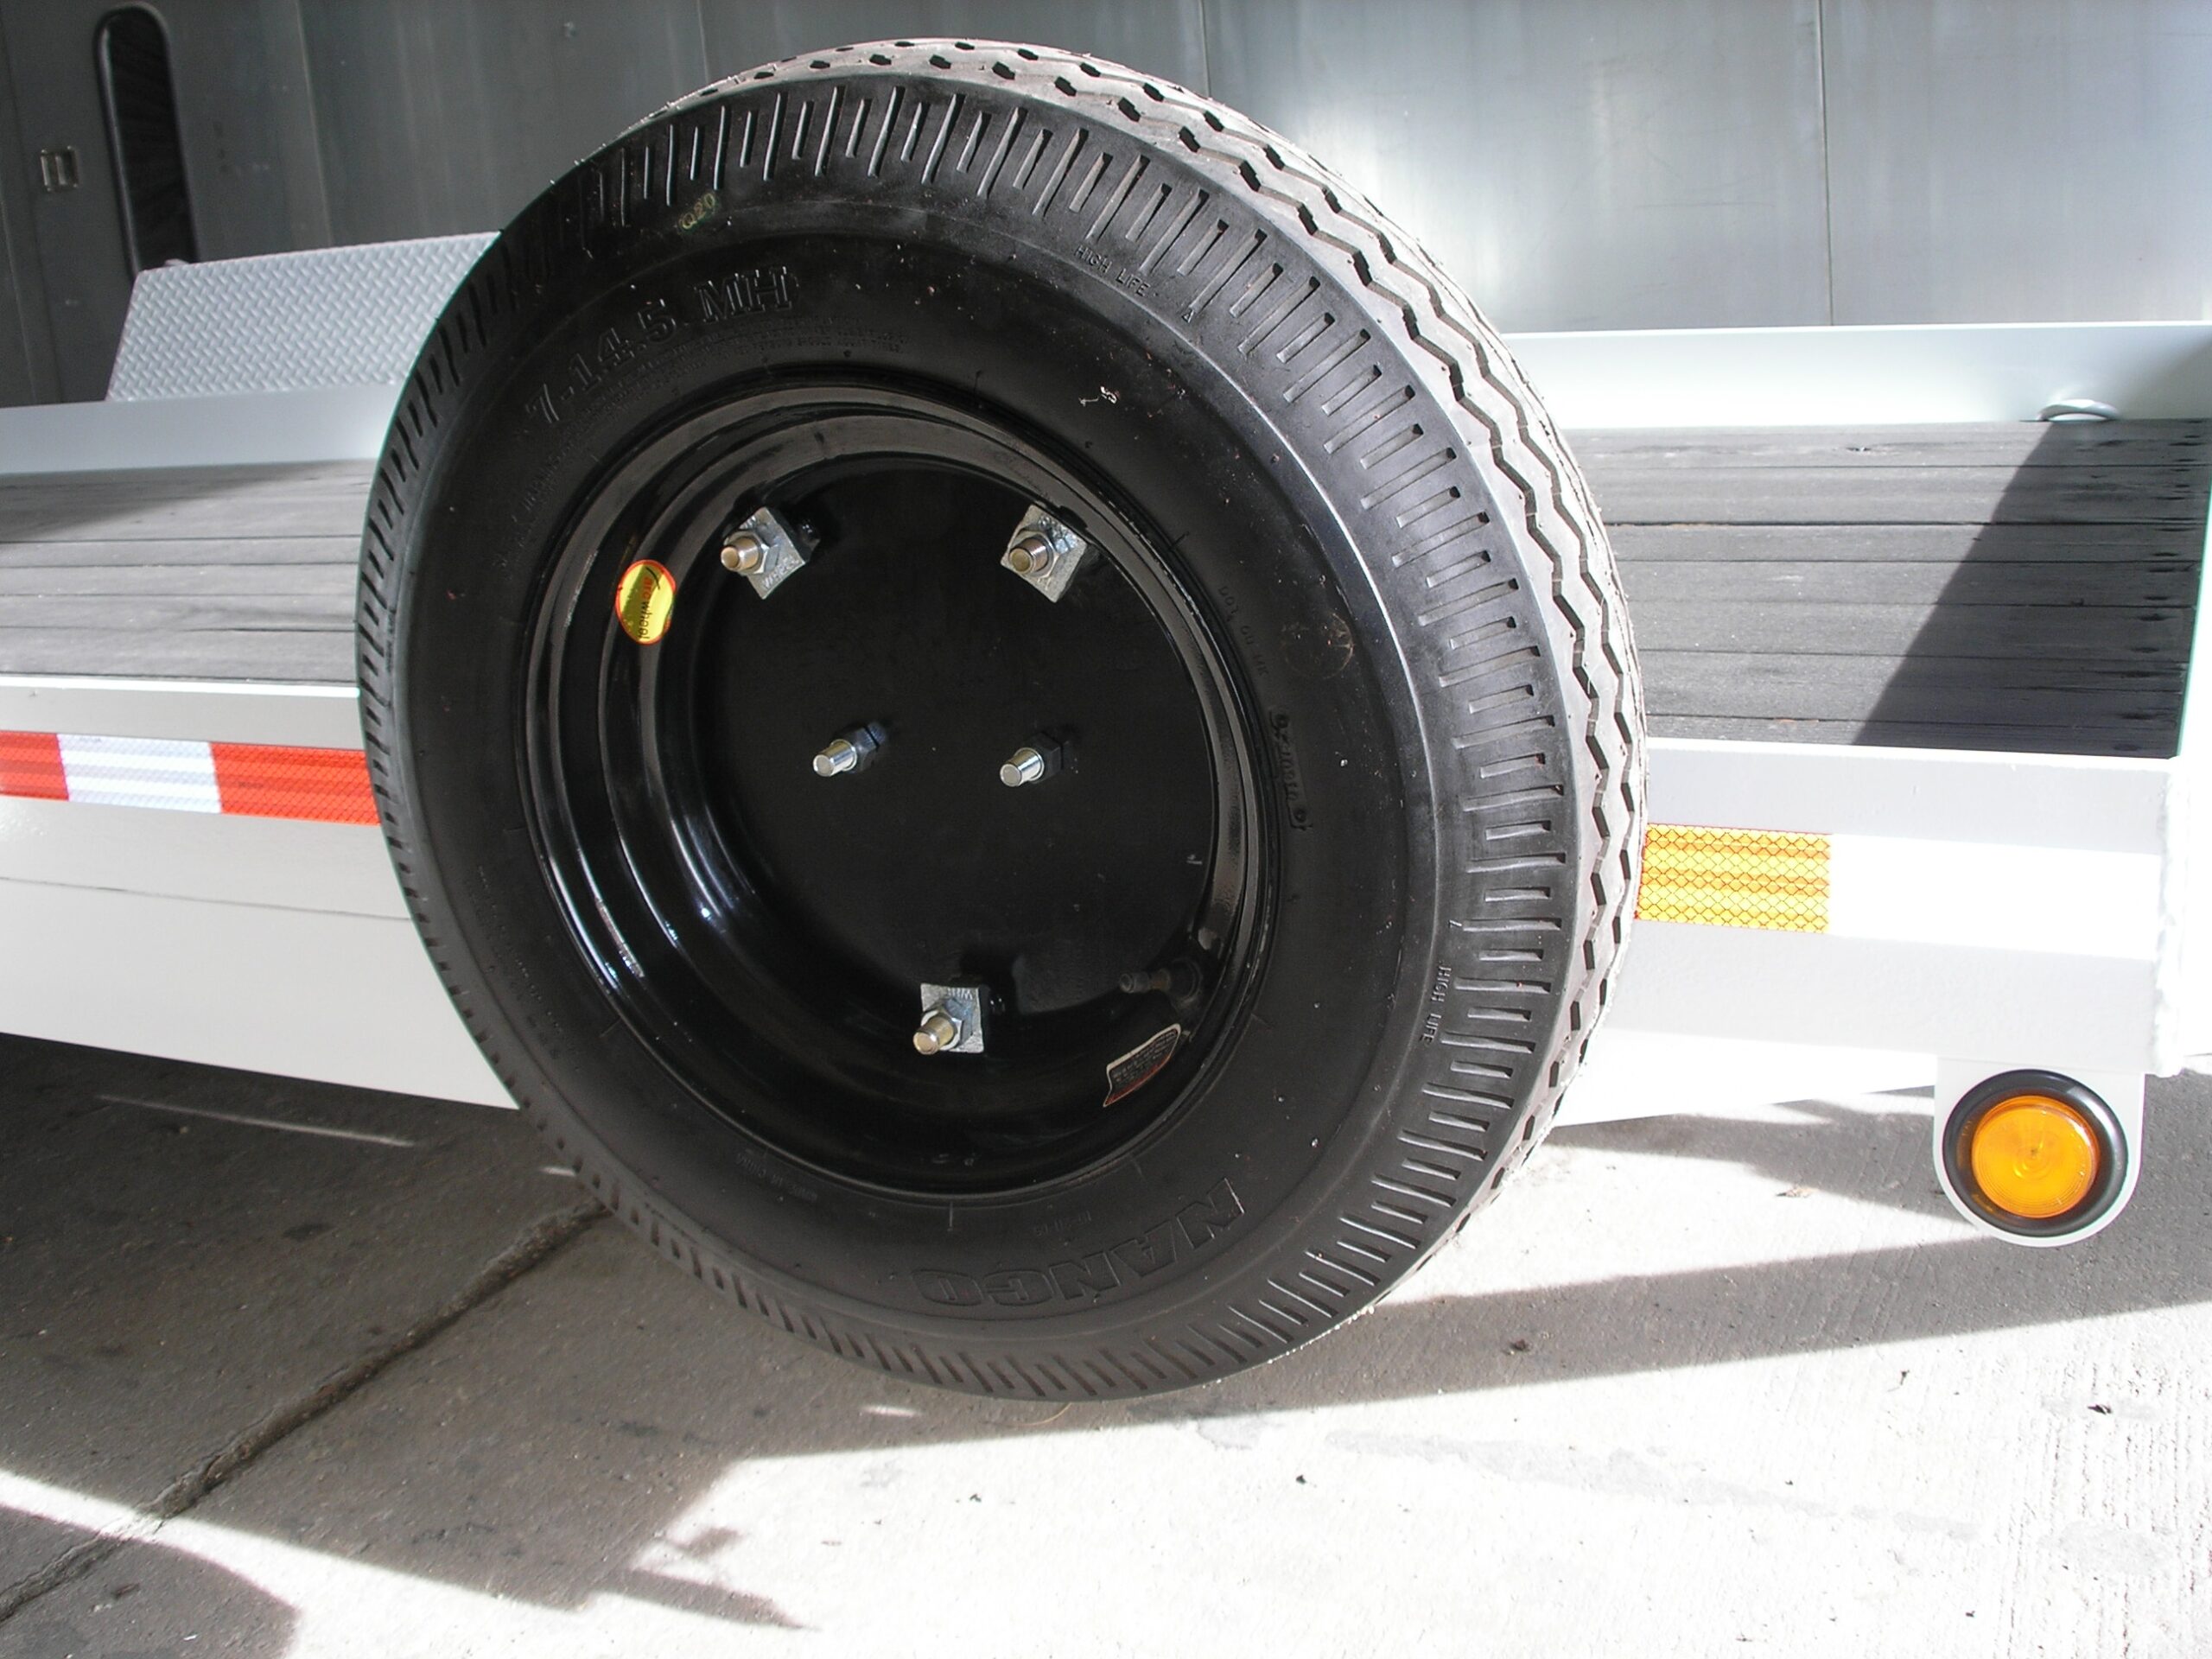 SPARE TIRE ADAPTOR FOR MOBILE HOME WHEEL